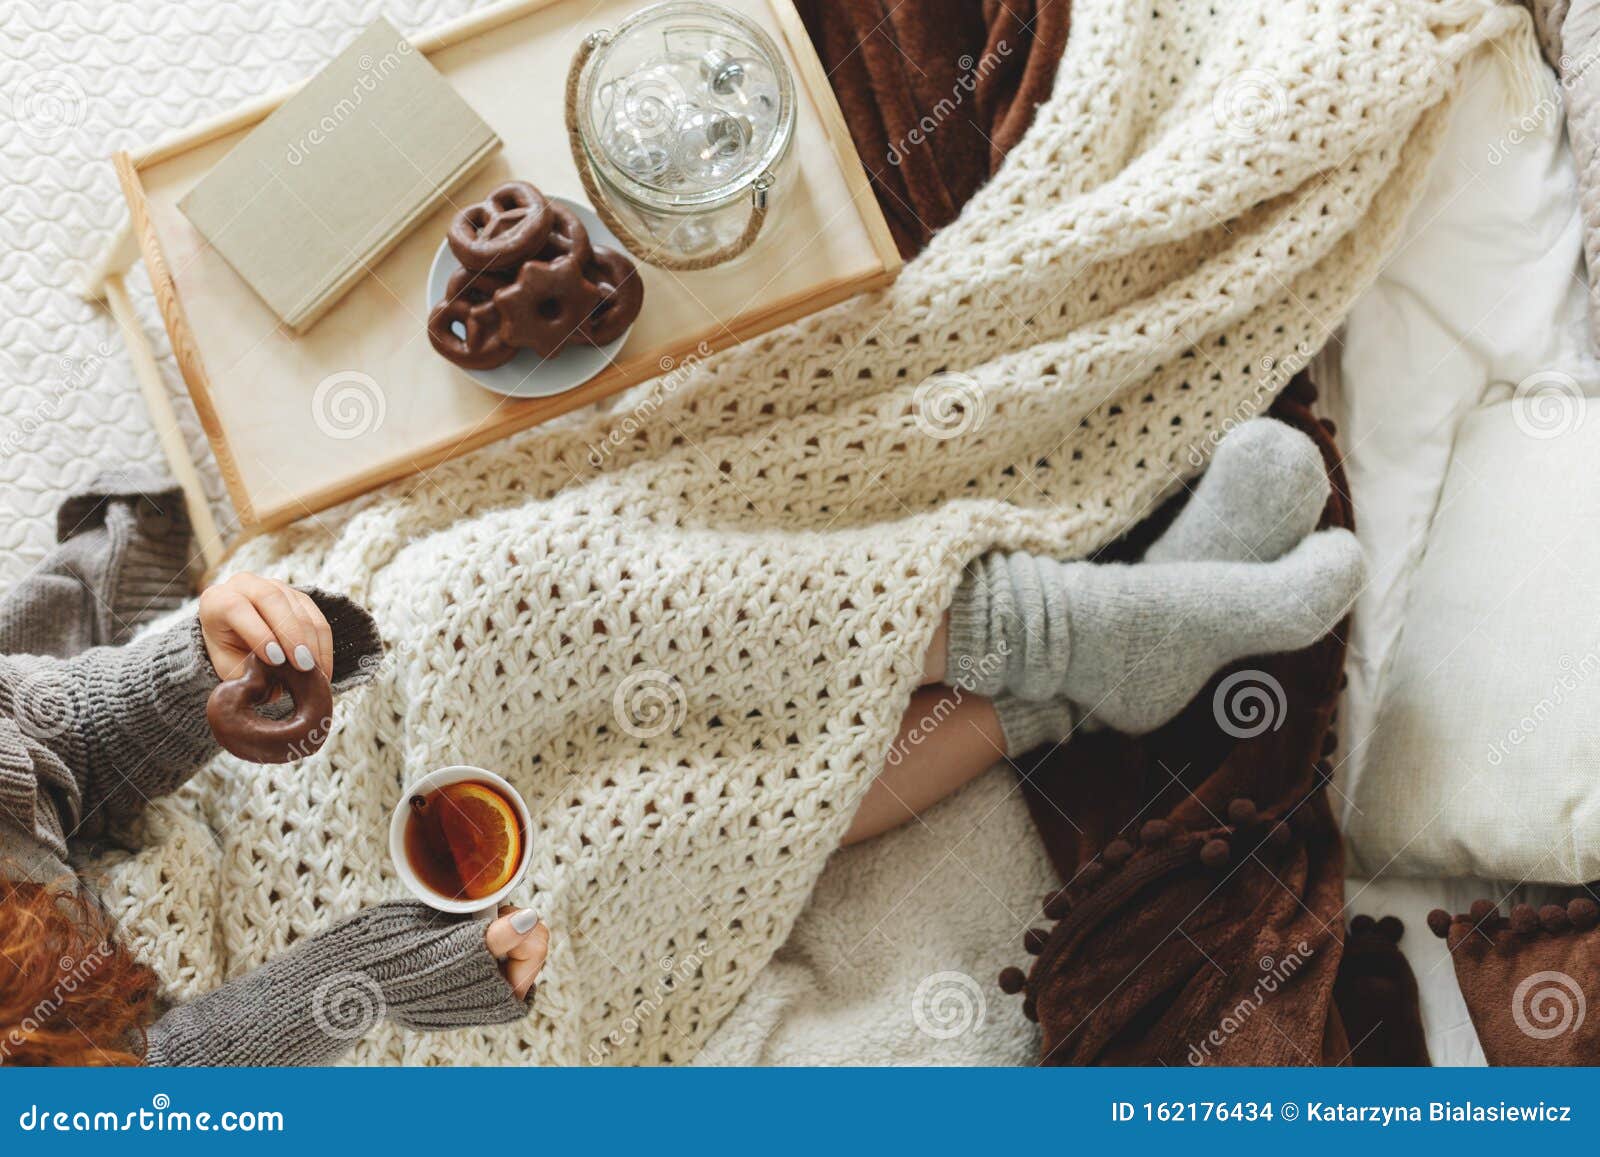 top view of young girl covered with cozy white blanket siting on bed drinking tea and eating